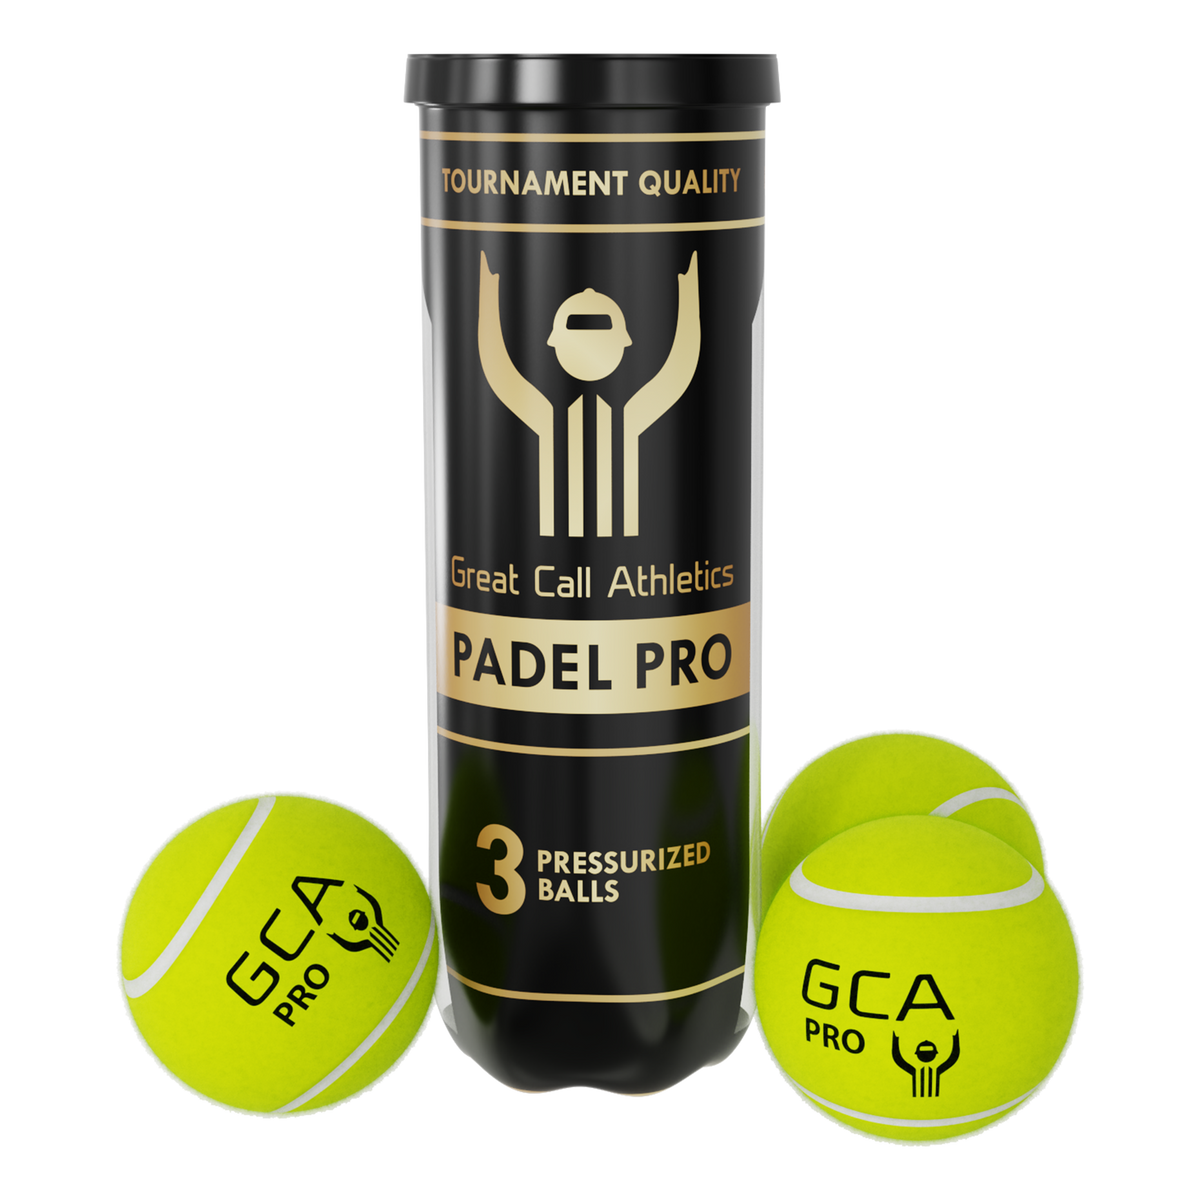 Padel Pro Balls for padel racquet sport 3  Pressurized Balls in 1 Can